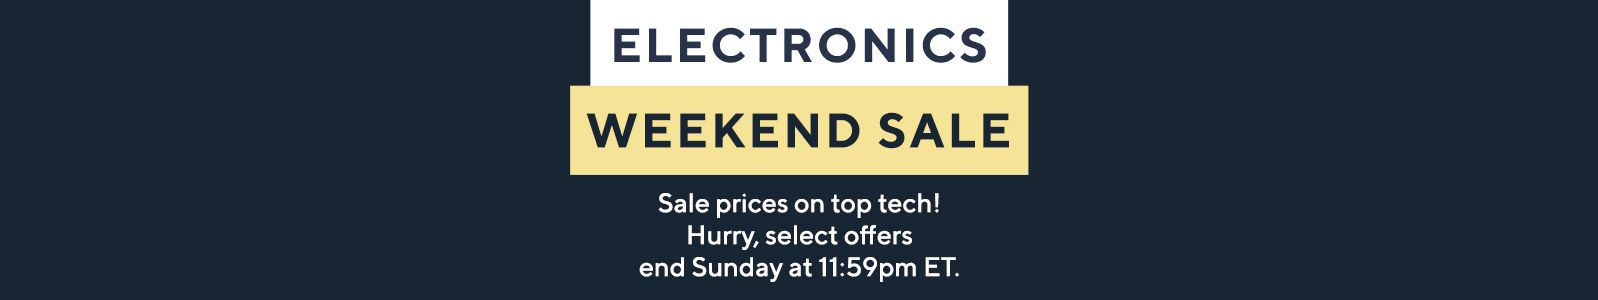 Electronics Weekend Sale. Sale Prices on top tech! Hurry, select offers end Sunday at 11:59pm ET.